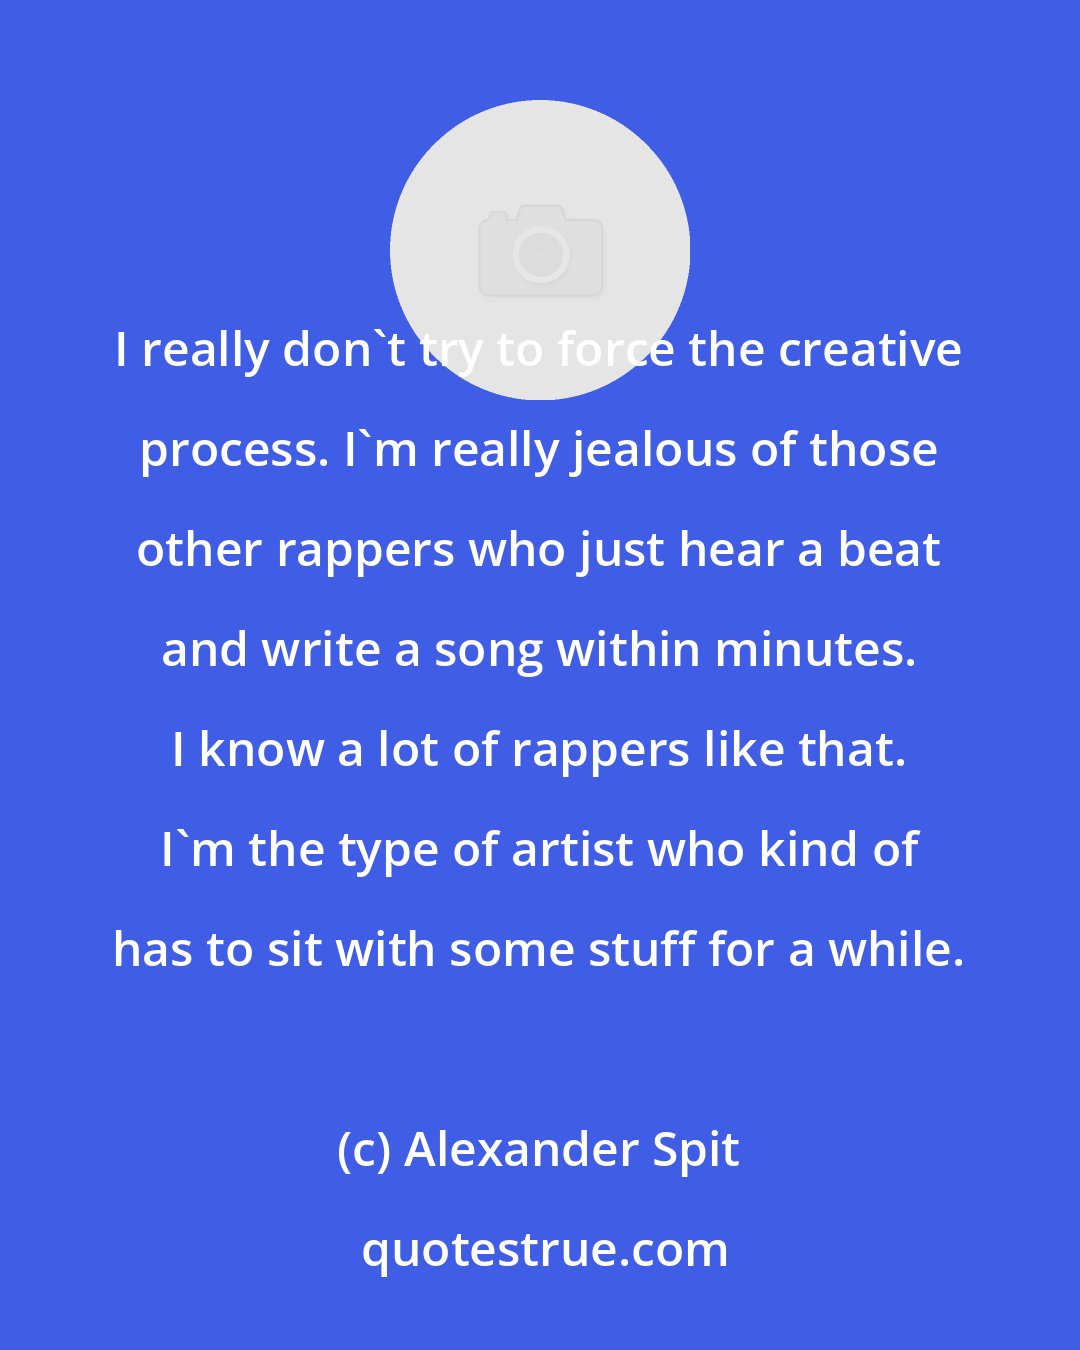 Alexander Spit: I really don't try to force the creative process. I'm really jealous of those other rappers who just hear a beat and write a song within minutes. I know a lot of rappers like that. I'm the type of artist who kind of has to sit with some stuff for a while.